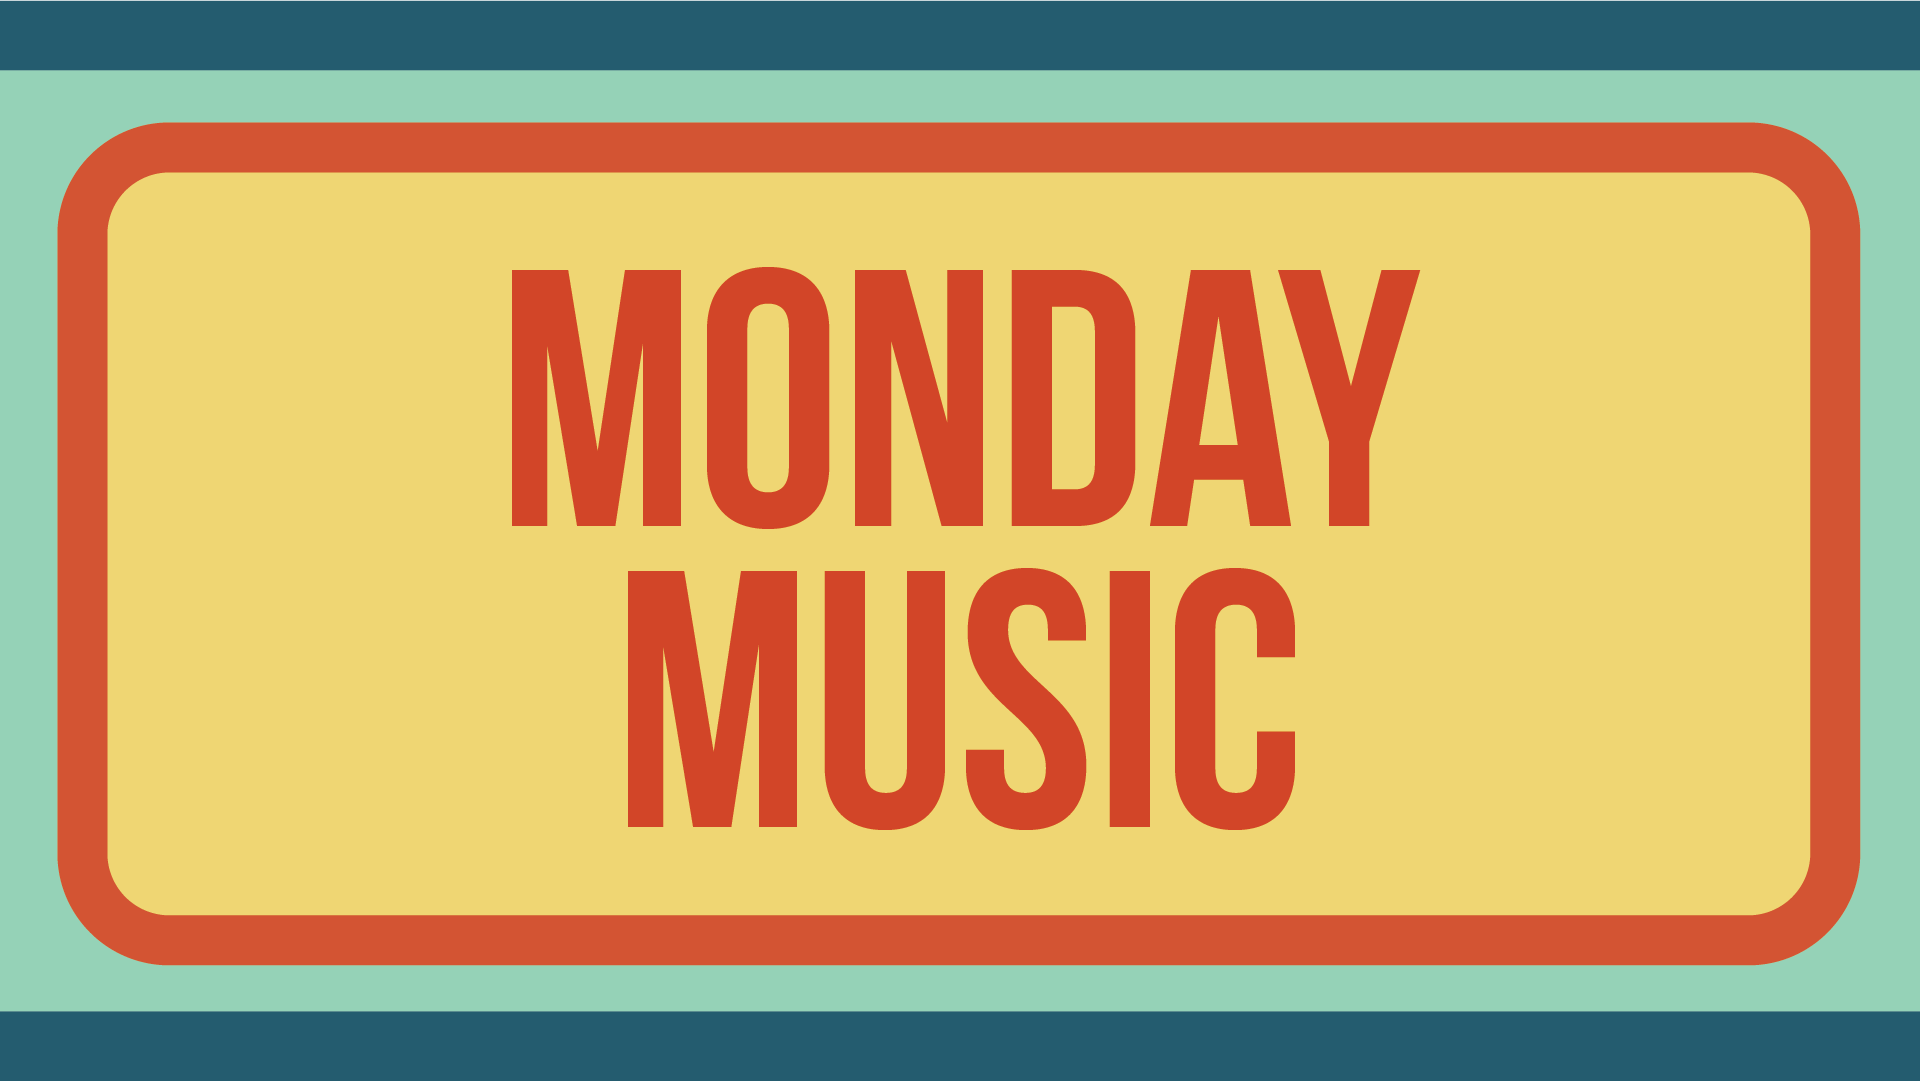 “Monday Music” in orange block text on a yellow rectangular background with rounded corners and an orange border.